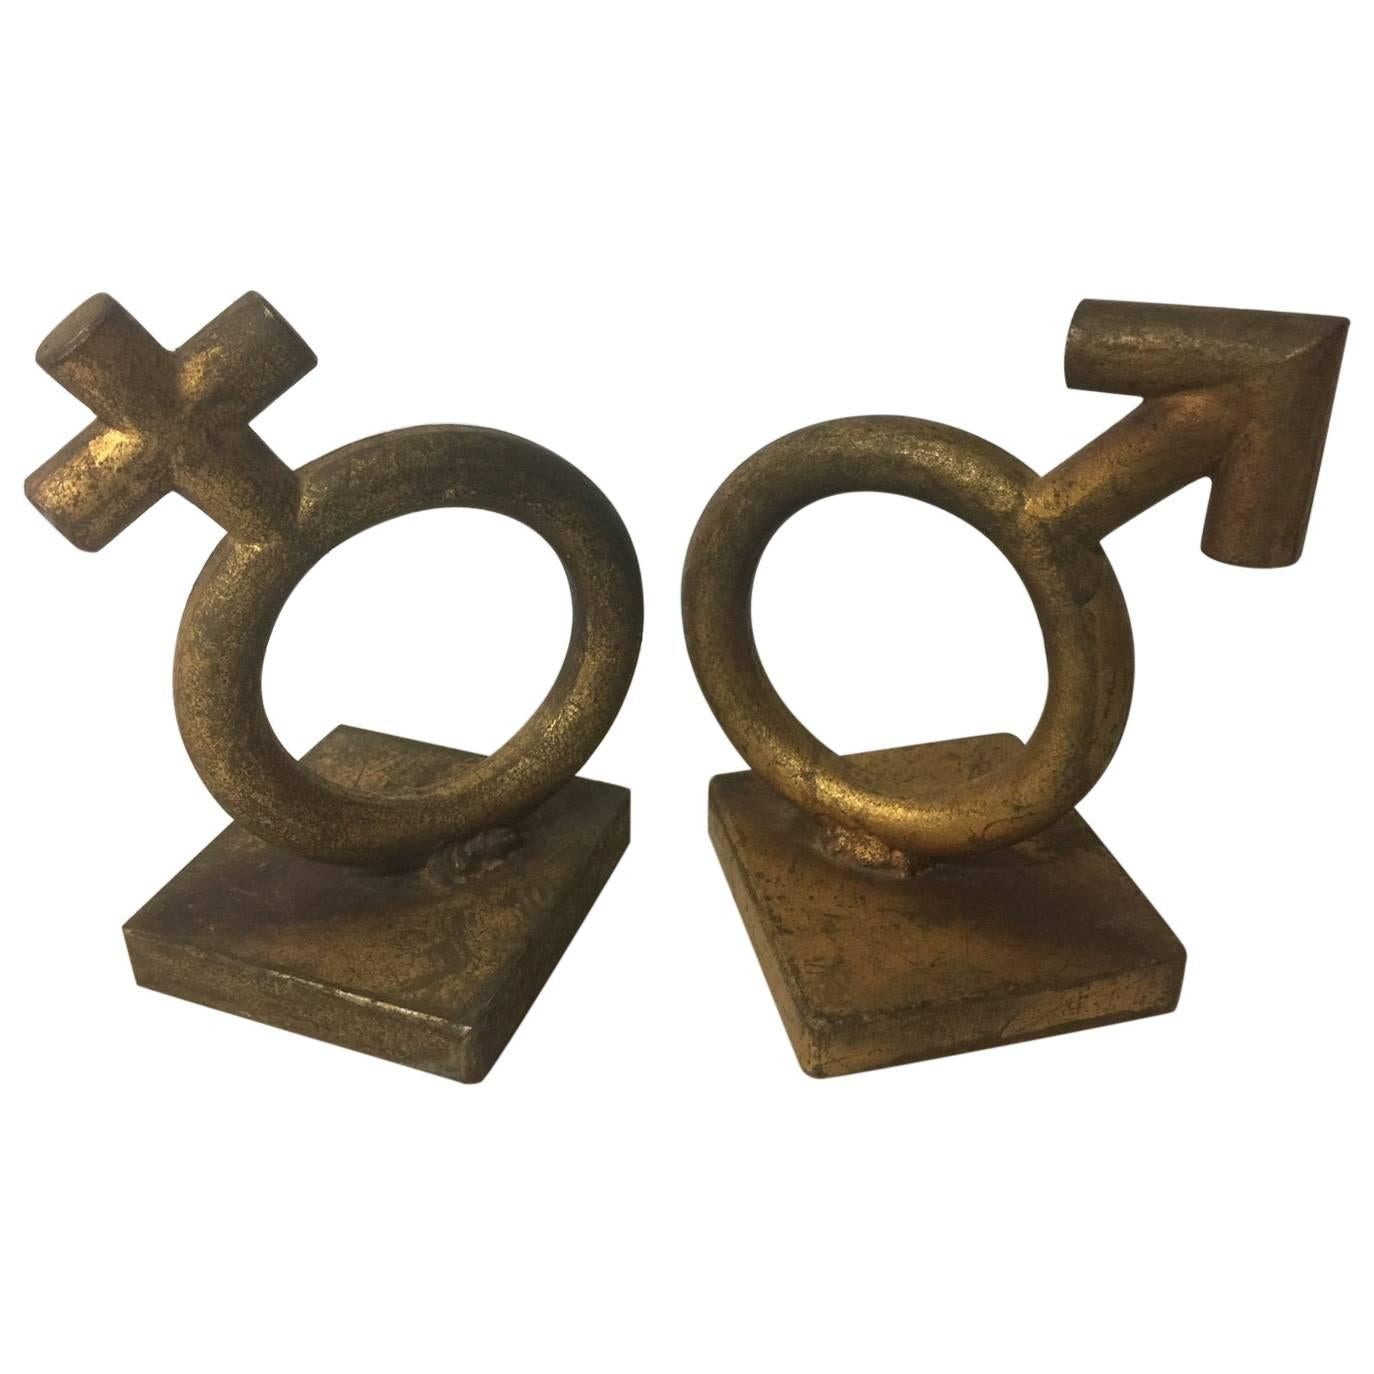 Iconic Midcentury Gender Symbol / Sex Bookends by C. Jere For Sale